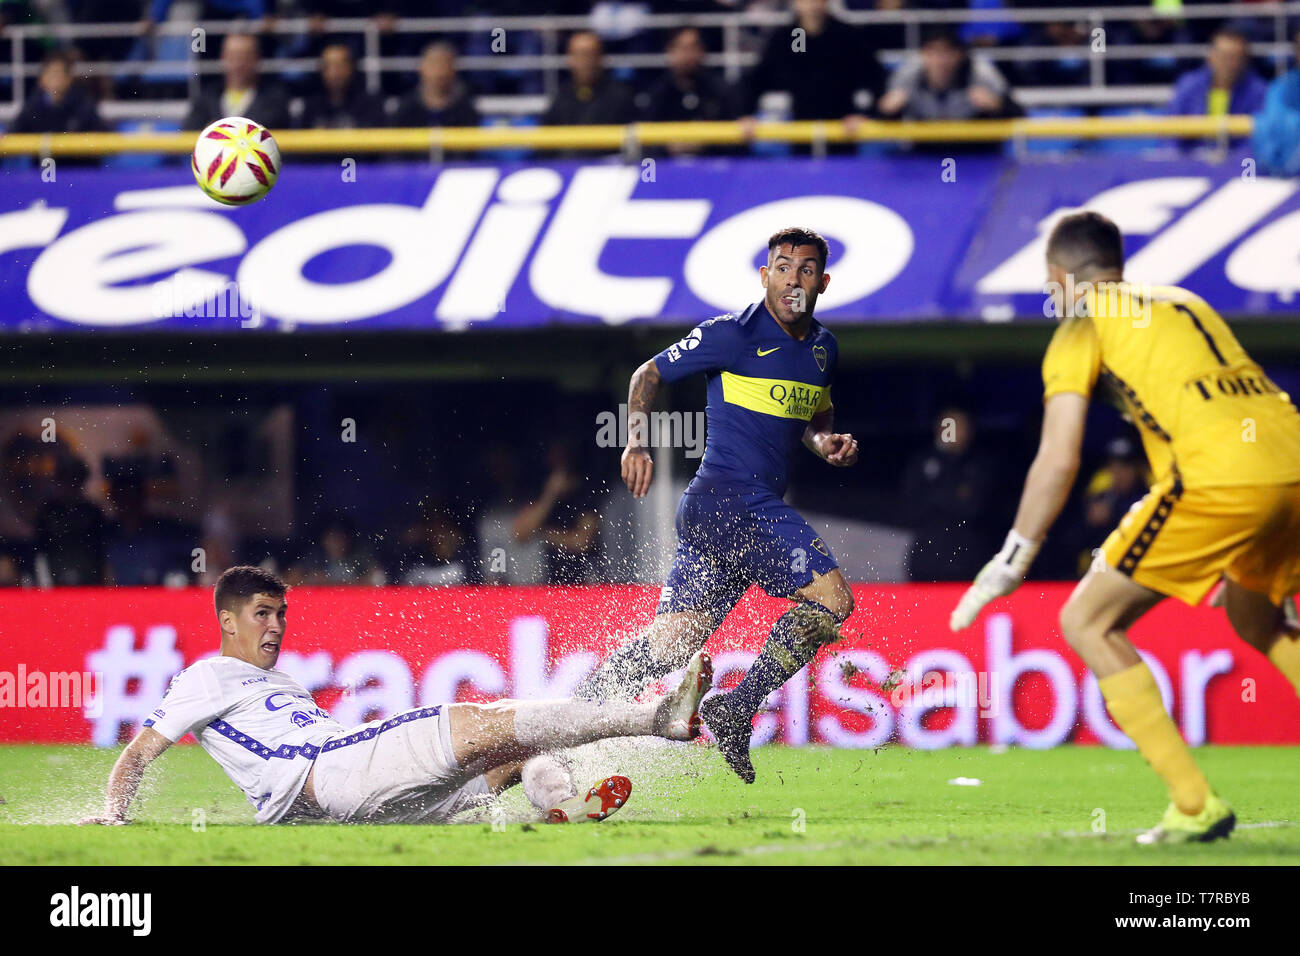 Buenos Aires, Argentina - April 04, 2019: Carlos Tevez is cut by the Godoy Cruz defense in the match for the Superliga cup in Buenos Aires, Argentina Stock Photo